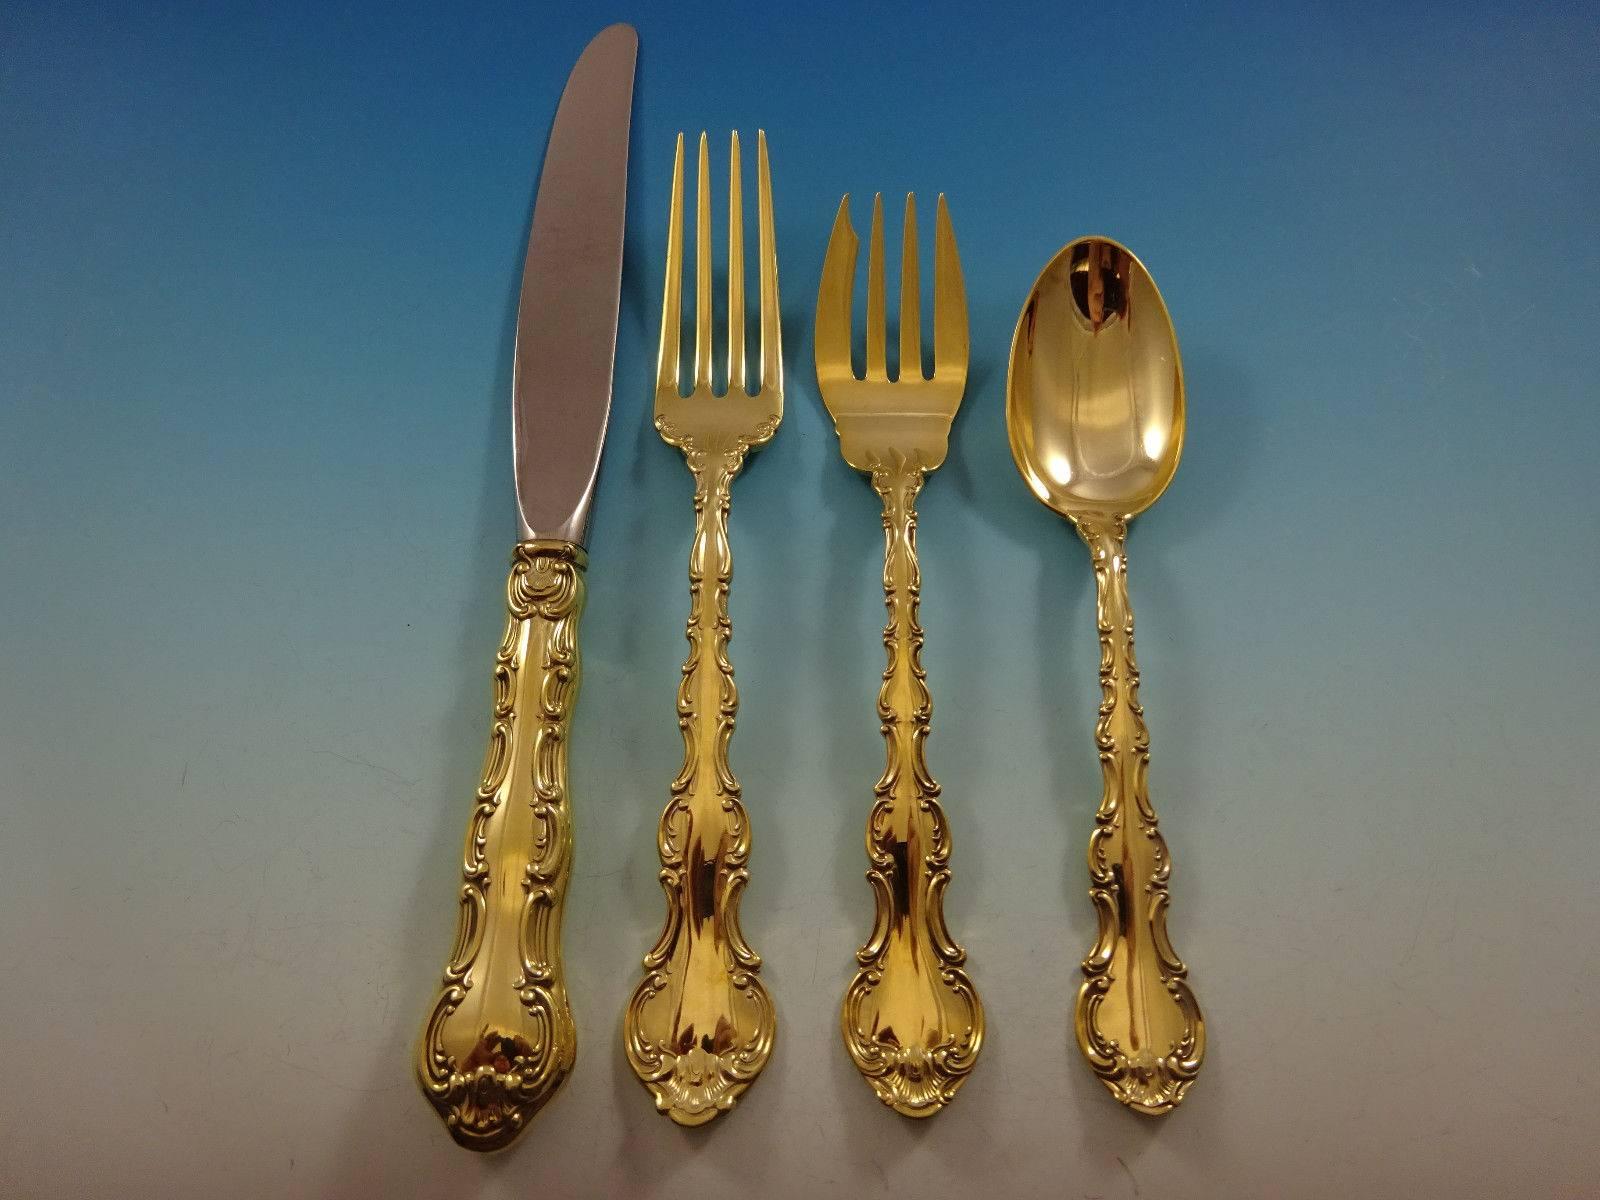 Gorgeous Strasbourg Gold by Gorham sterling silver flatware set of 48 pieces. Gold flatware is on trend and makes a bold statement on your table. 

This set is vermeil (completely gold-washed) and includes:
 
12 knives, 8 7/8